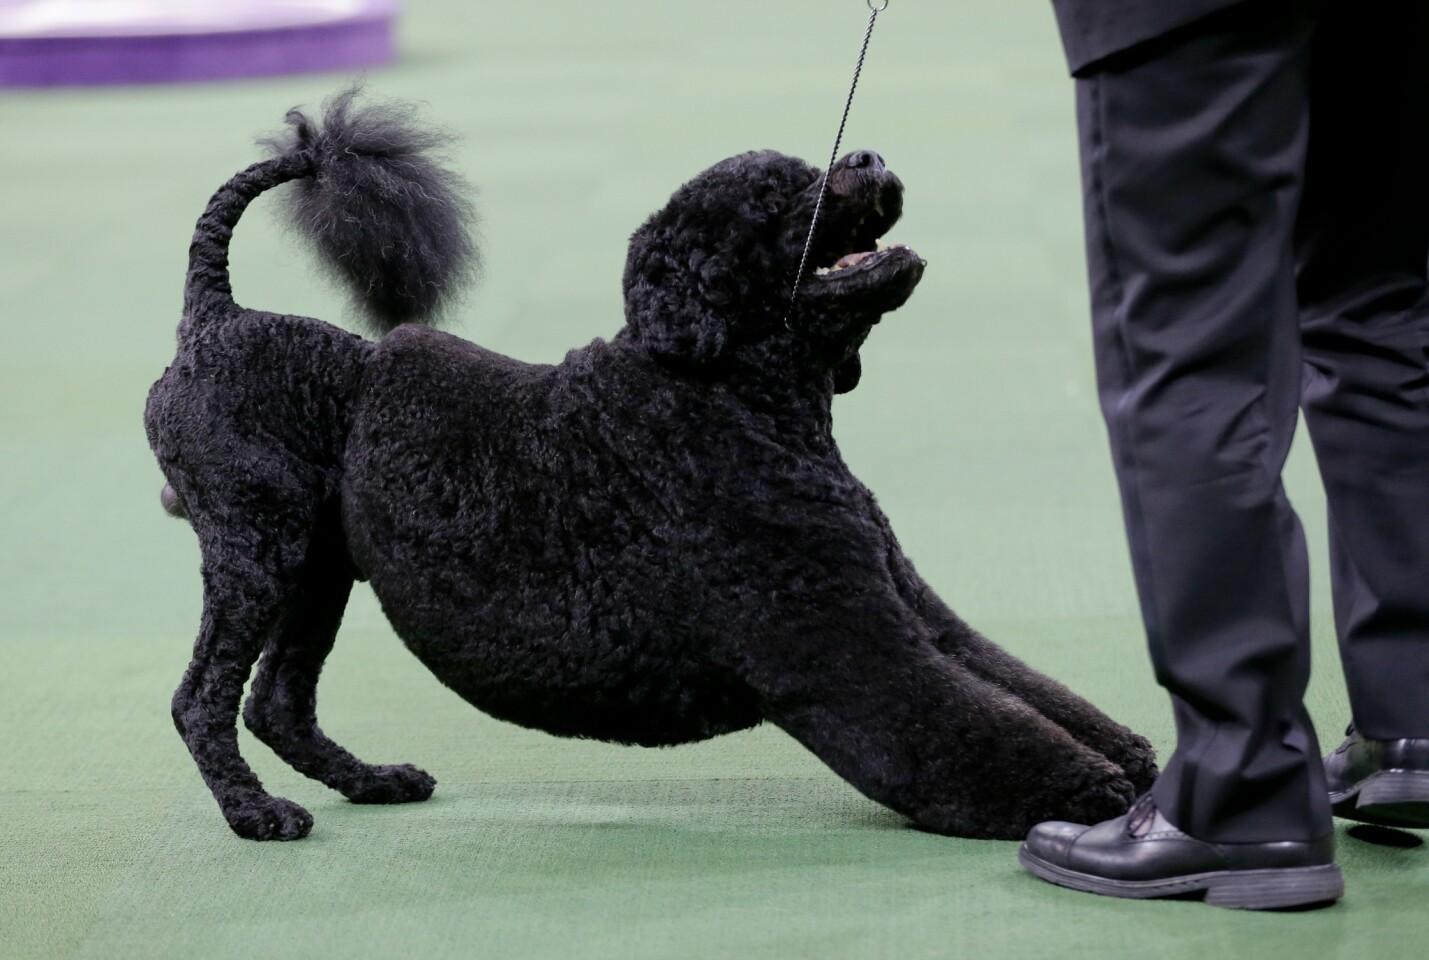 dette det samme Fitness Westminster dog show to add obedience event next year - Los Angeles Times